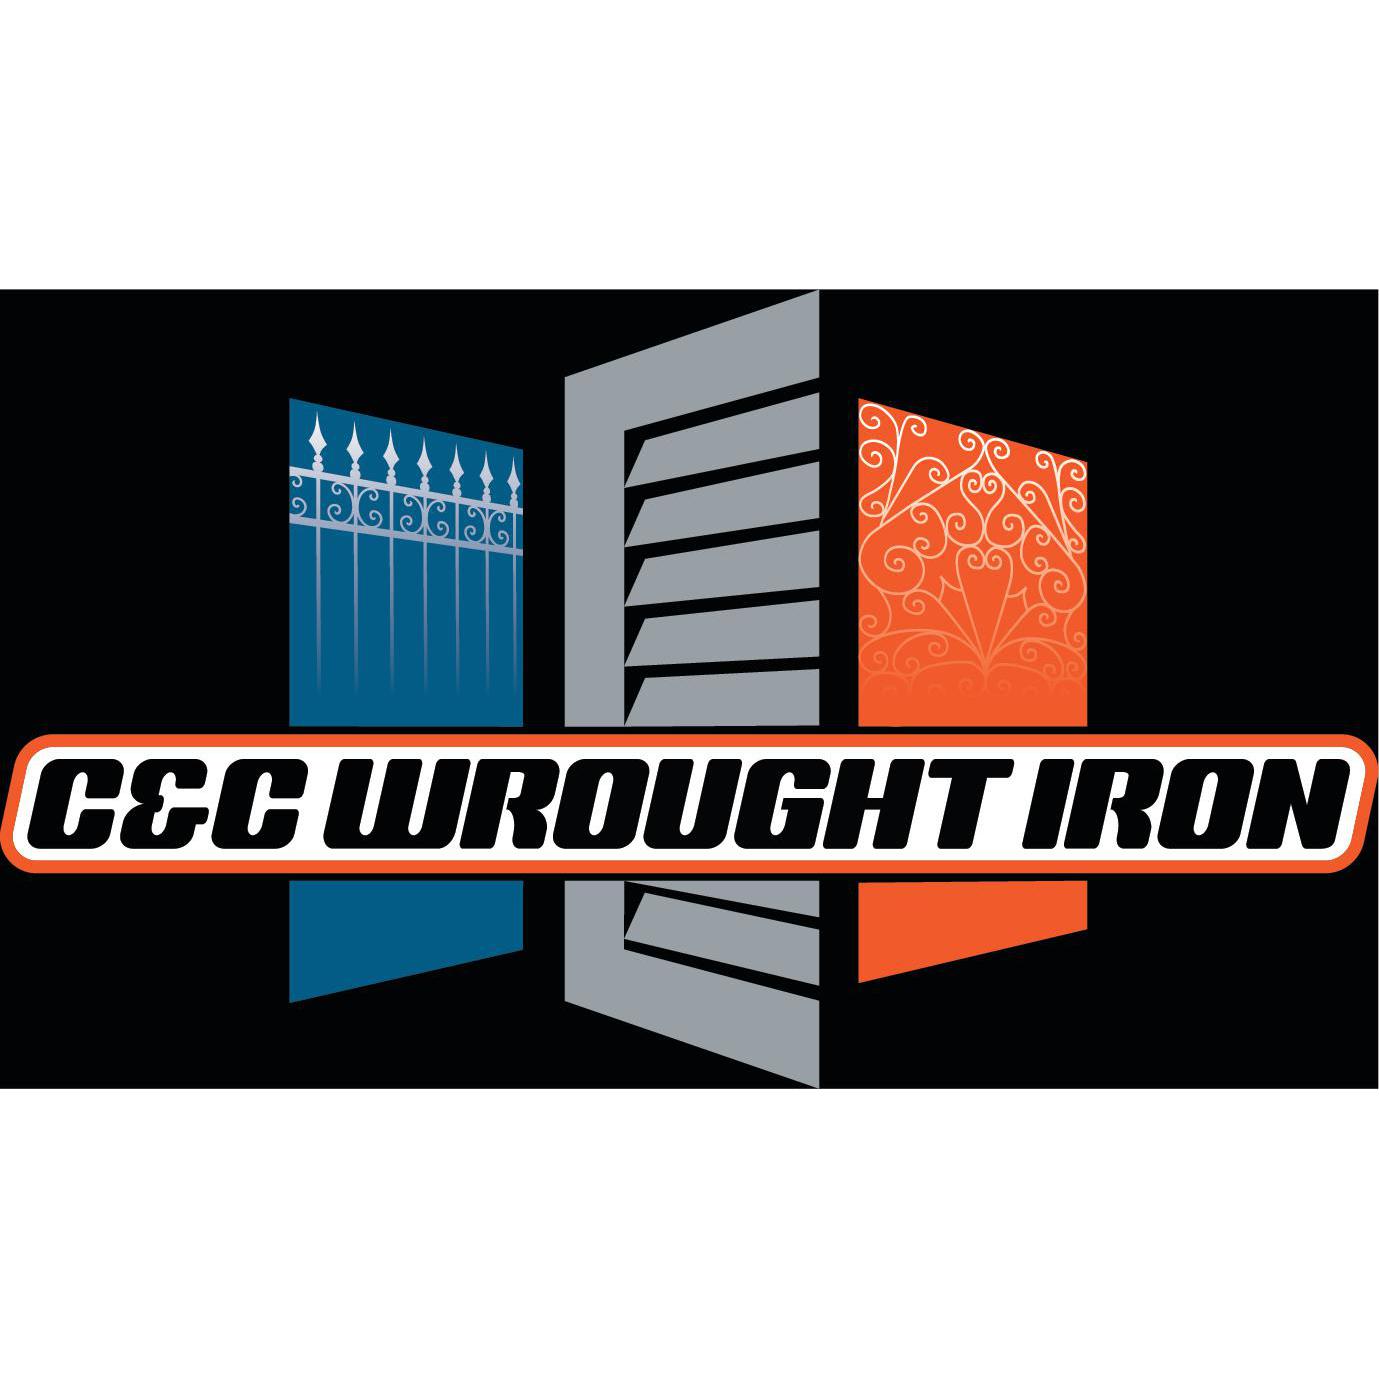 C & C Wrought Iron - Jamisontown, NSW 2750 - (02) 4722 2096 | ShowMeLocal.com